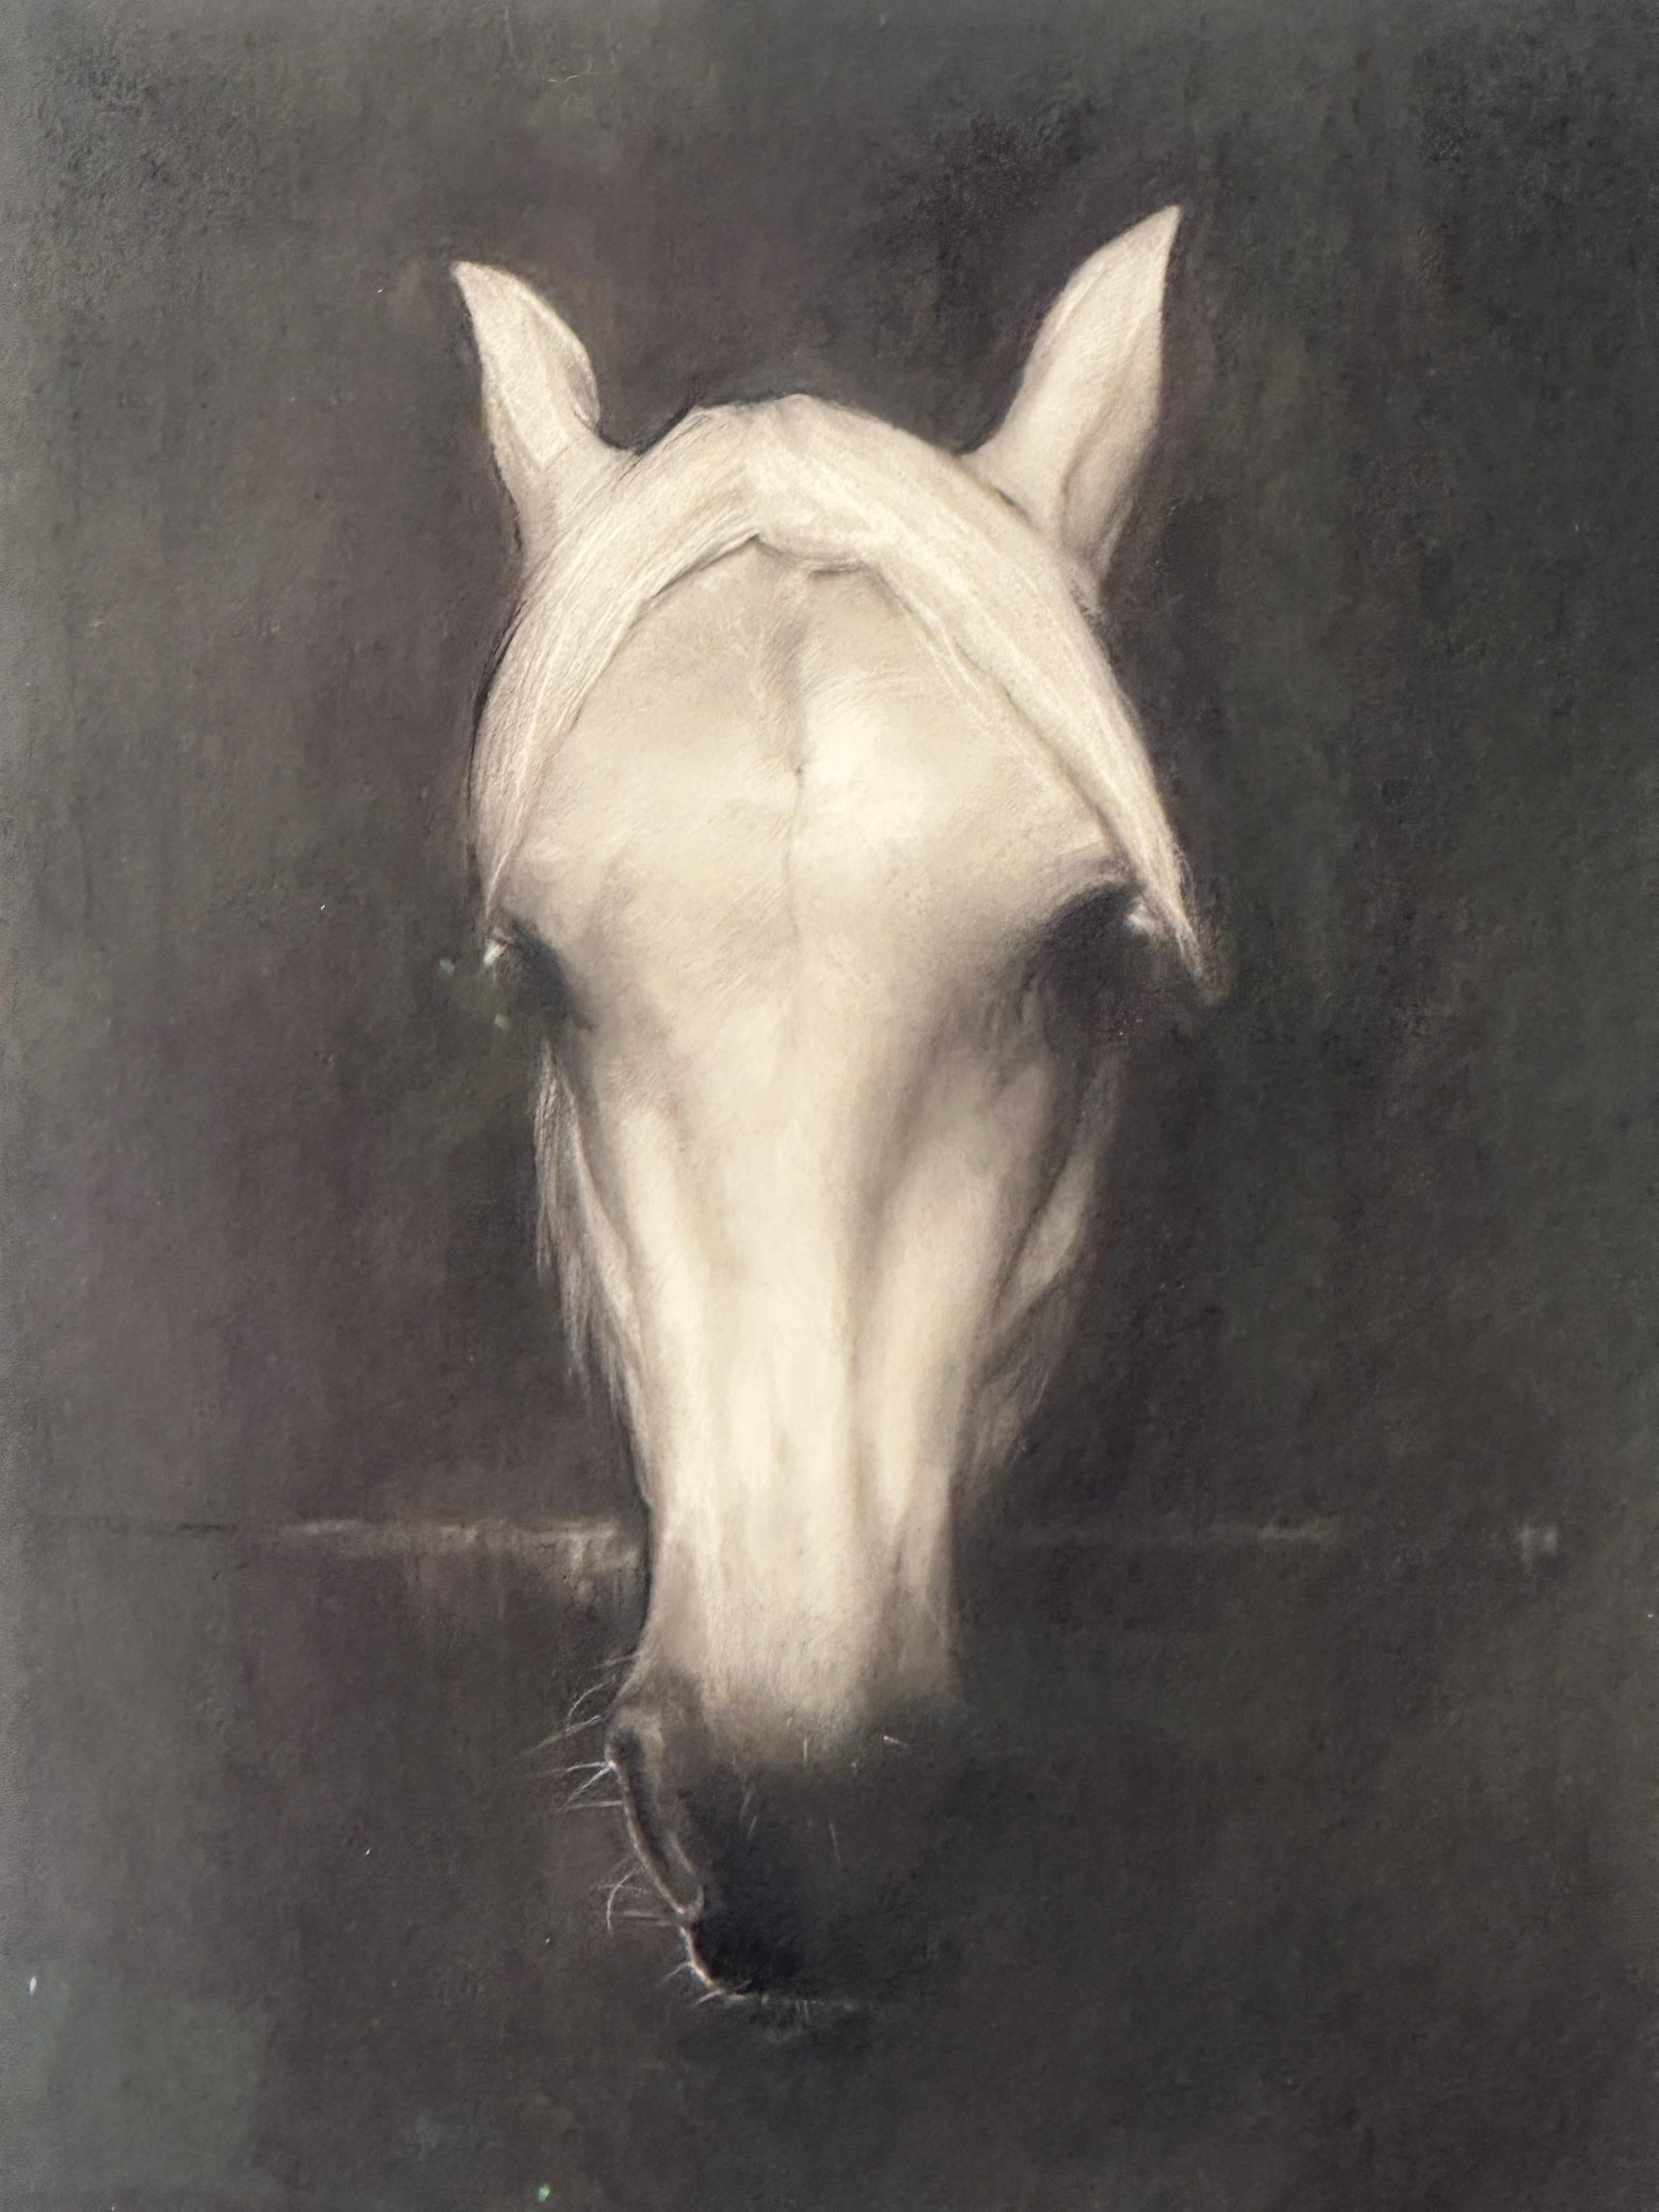 Fairy- 21st Century Contemporary Charcoal drawing of the head of a horse - Art by Rosanna Gaddoni